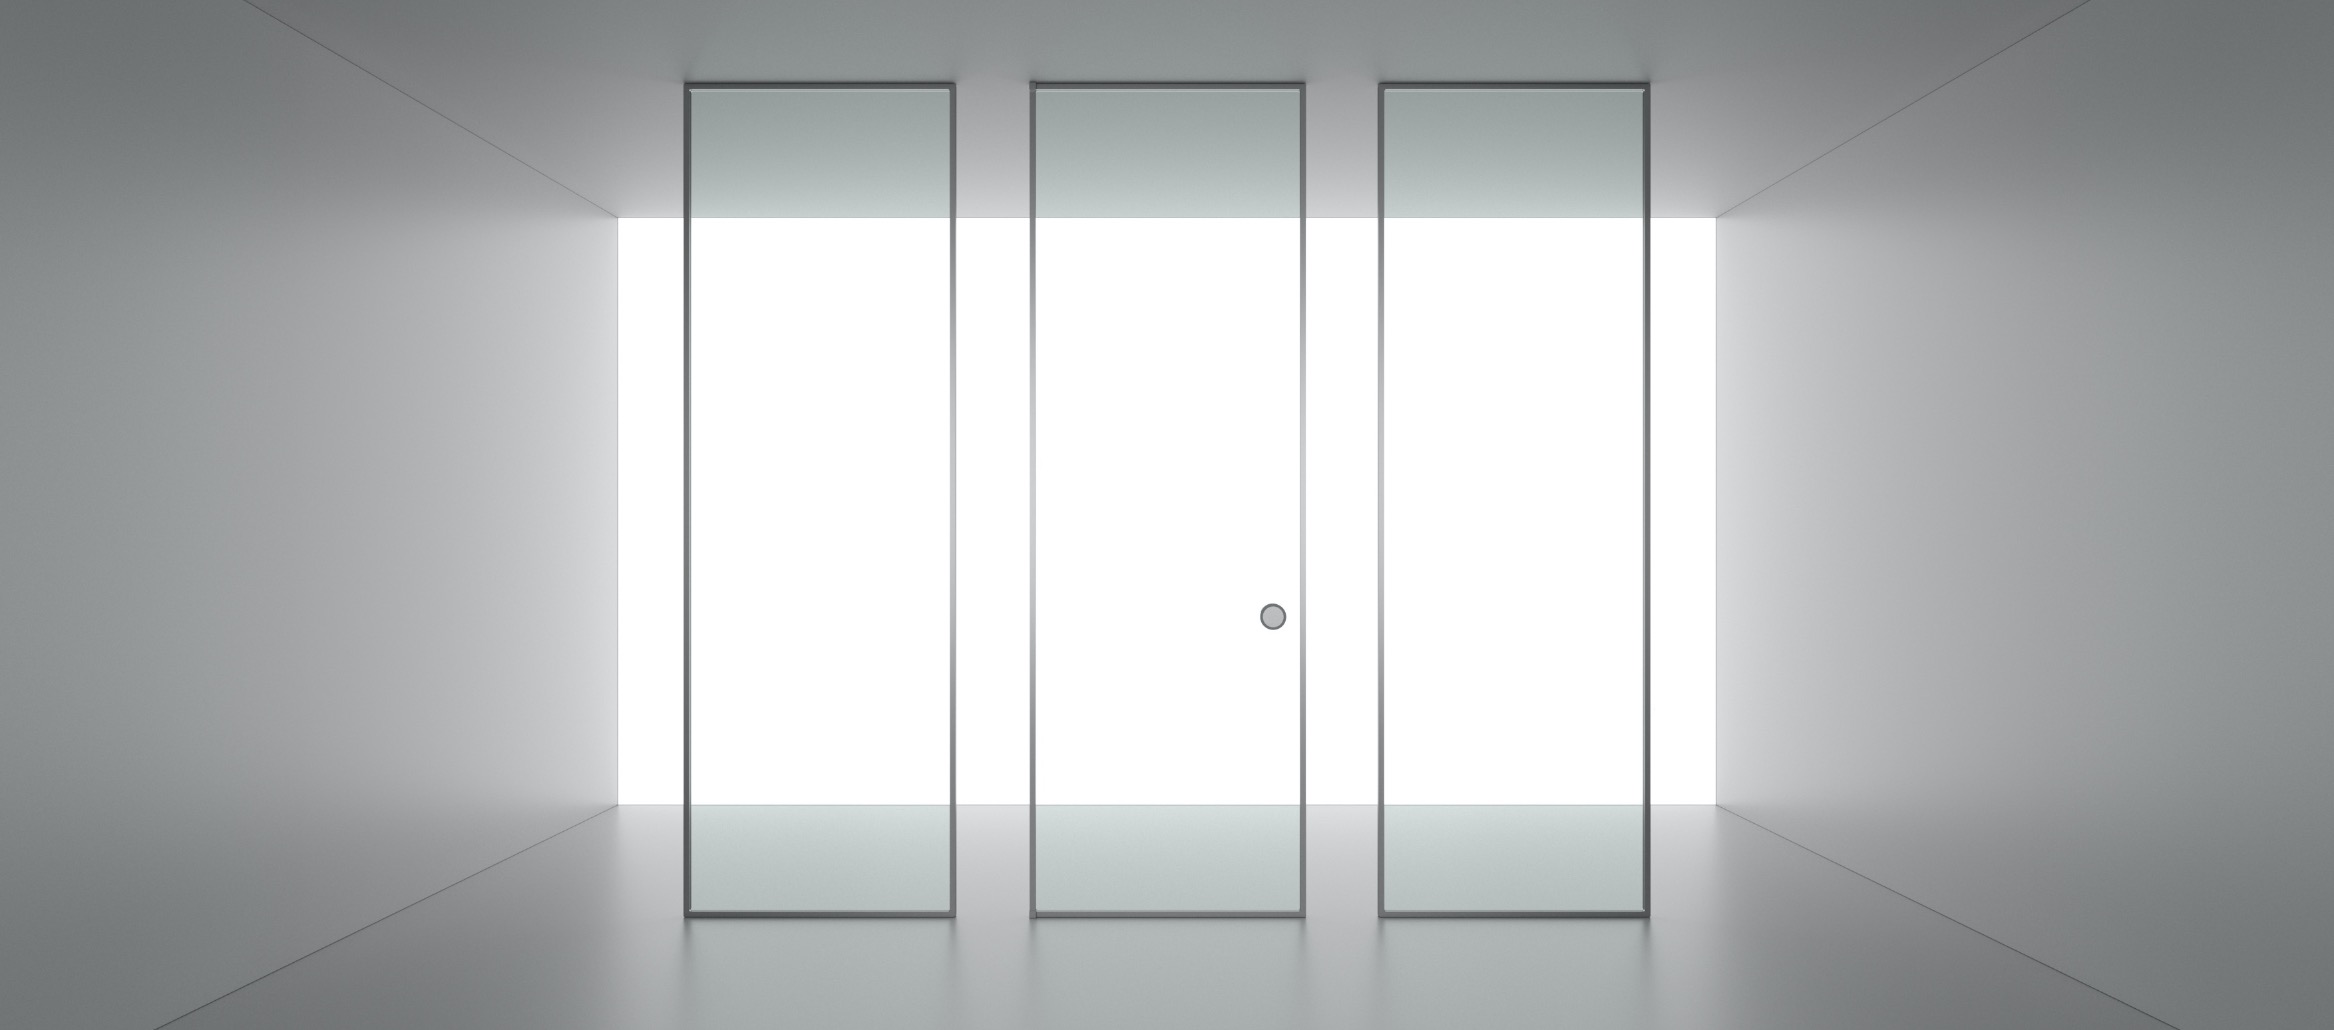 The Suite modular system is formed of aluminium and glass doors and fixed panels